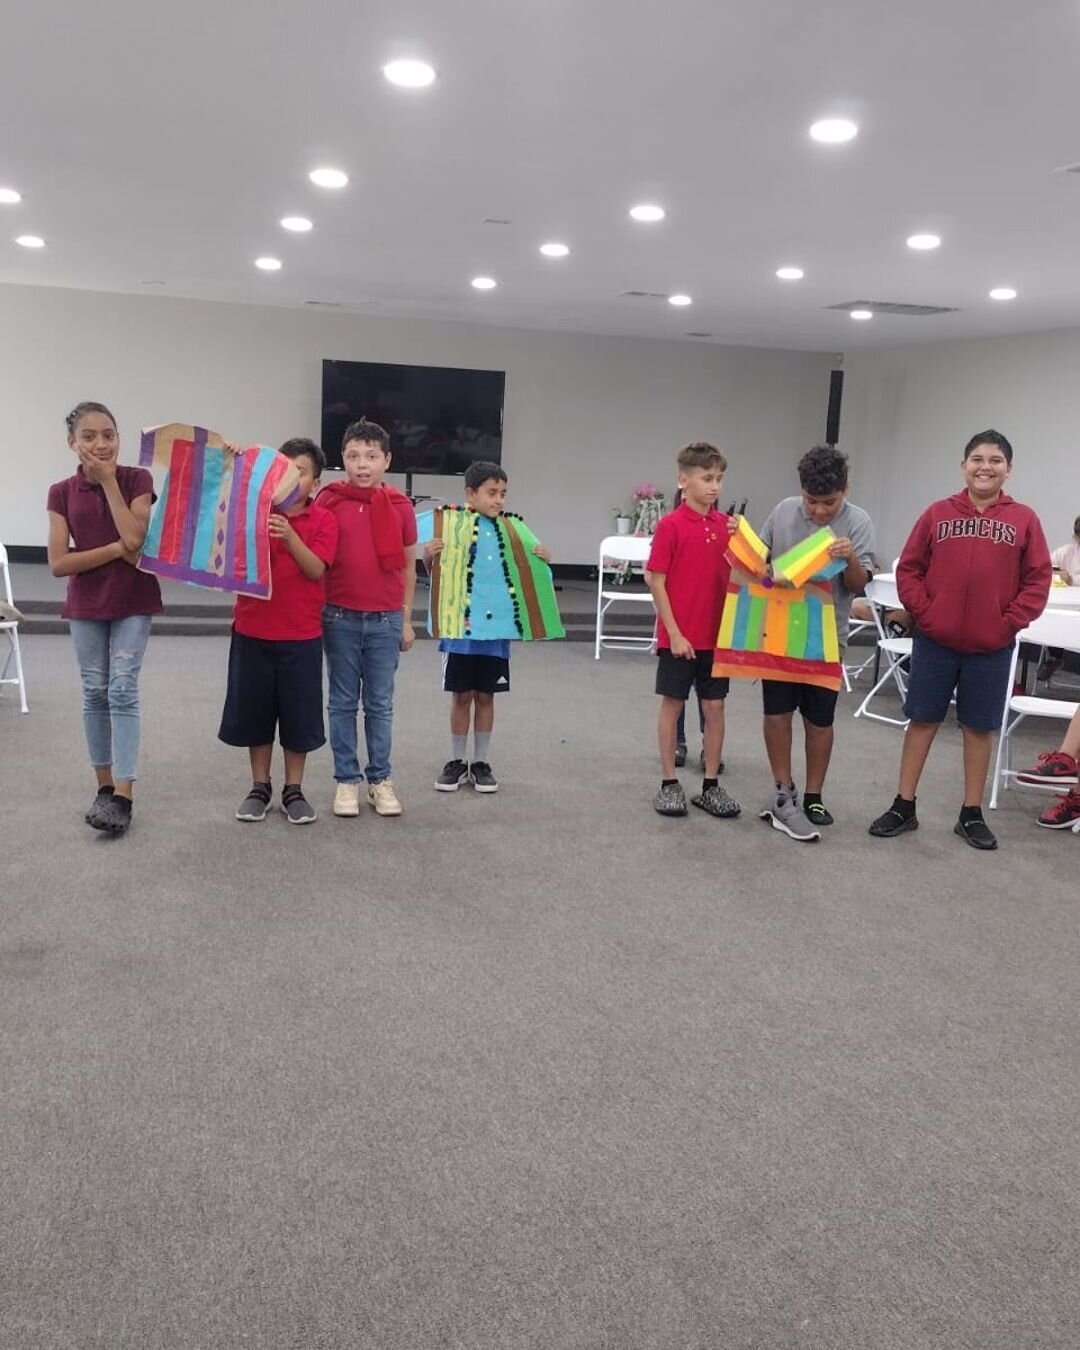 On this day we learned the story of Joseph. Our lovely volunteer bible teacher allowed us to create our own Joseph paper coat. 🧥 🎨  #storyofJoseph #josephfromthebible #funcrafts #bibleclass #maryvale #mentorkidsUSA